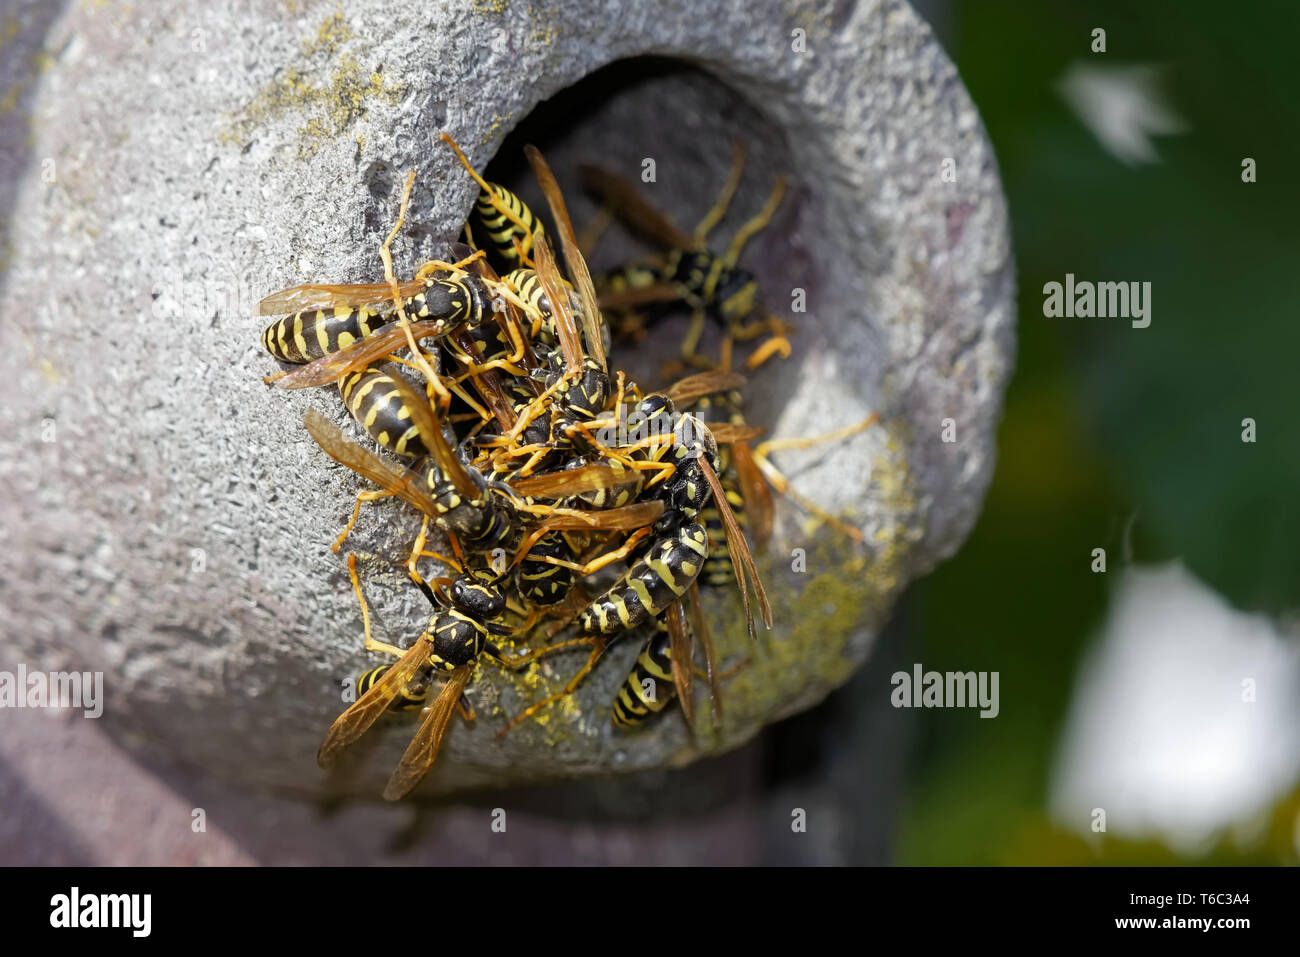 European paper wasp in a nesting box Stock Photo